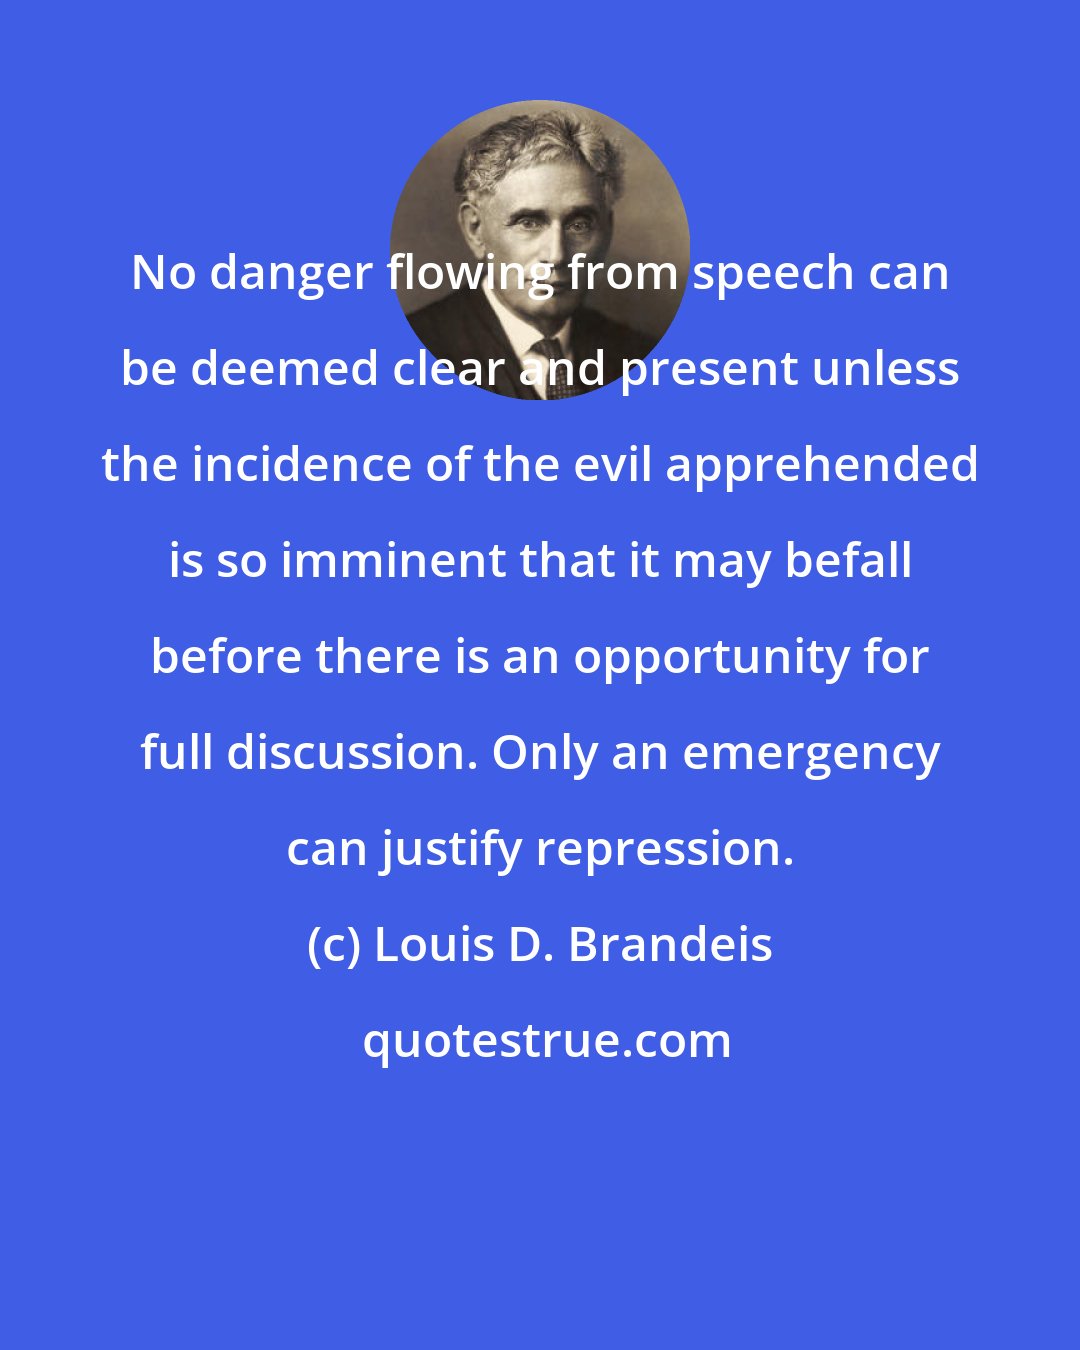 Louis D. Brandeis: No danger flowing from speech can be deemed clear and present unless the incidence of the evil apprehended is so imminent that it may befall before there is an opportunity for full discussion. Only an emergency can justify repression.